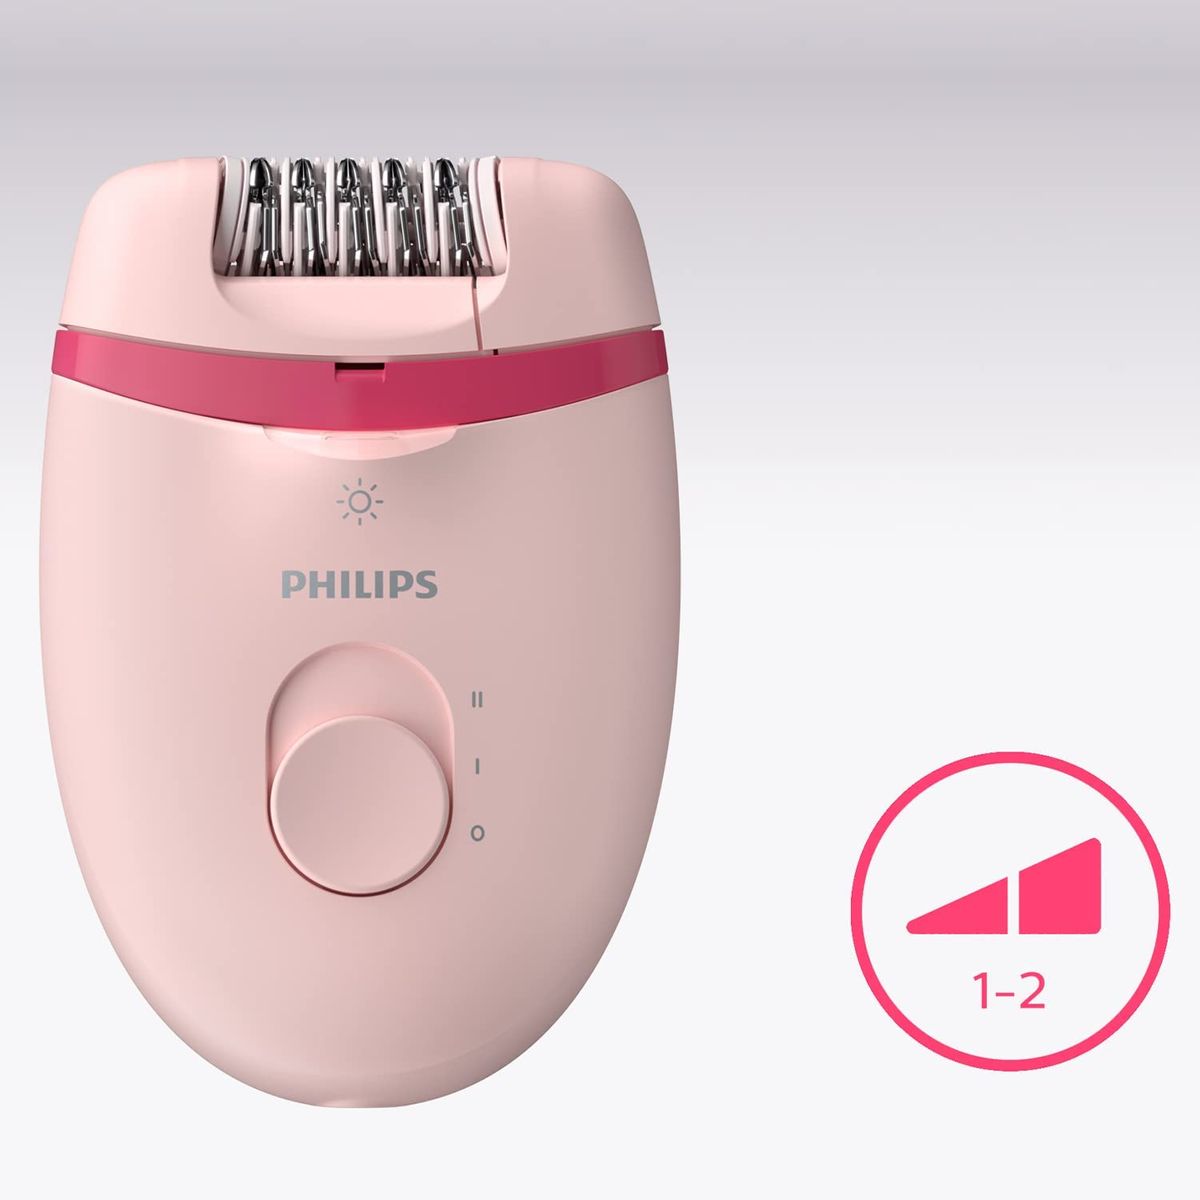 Philips Satinelle Essential epilator set BRP531/00 Smooth skin for weeks 2 speed settings mini epilator for sensitive areas tweezers for fine corrections pink/white.